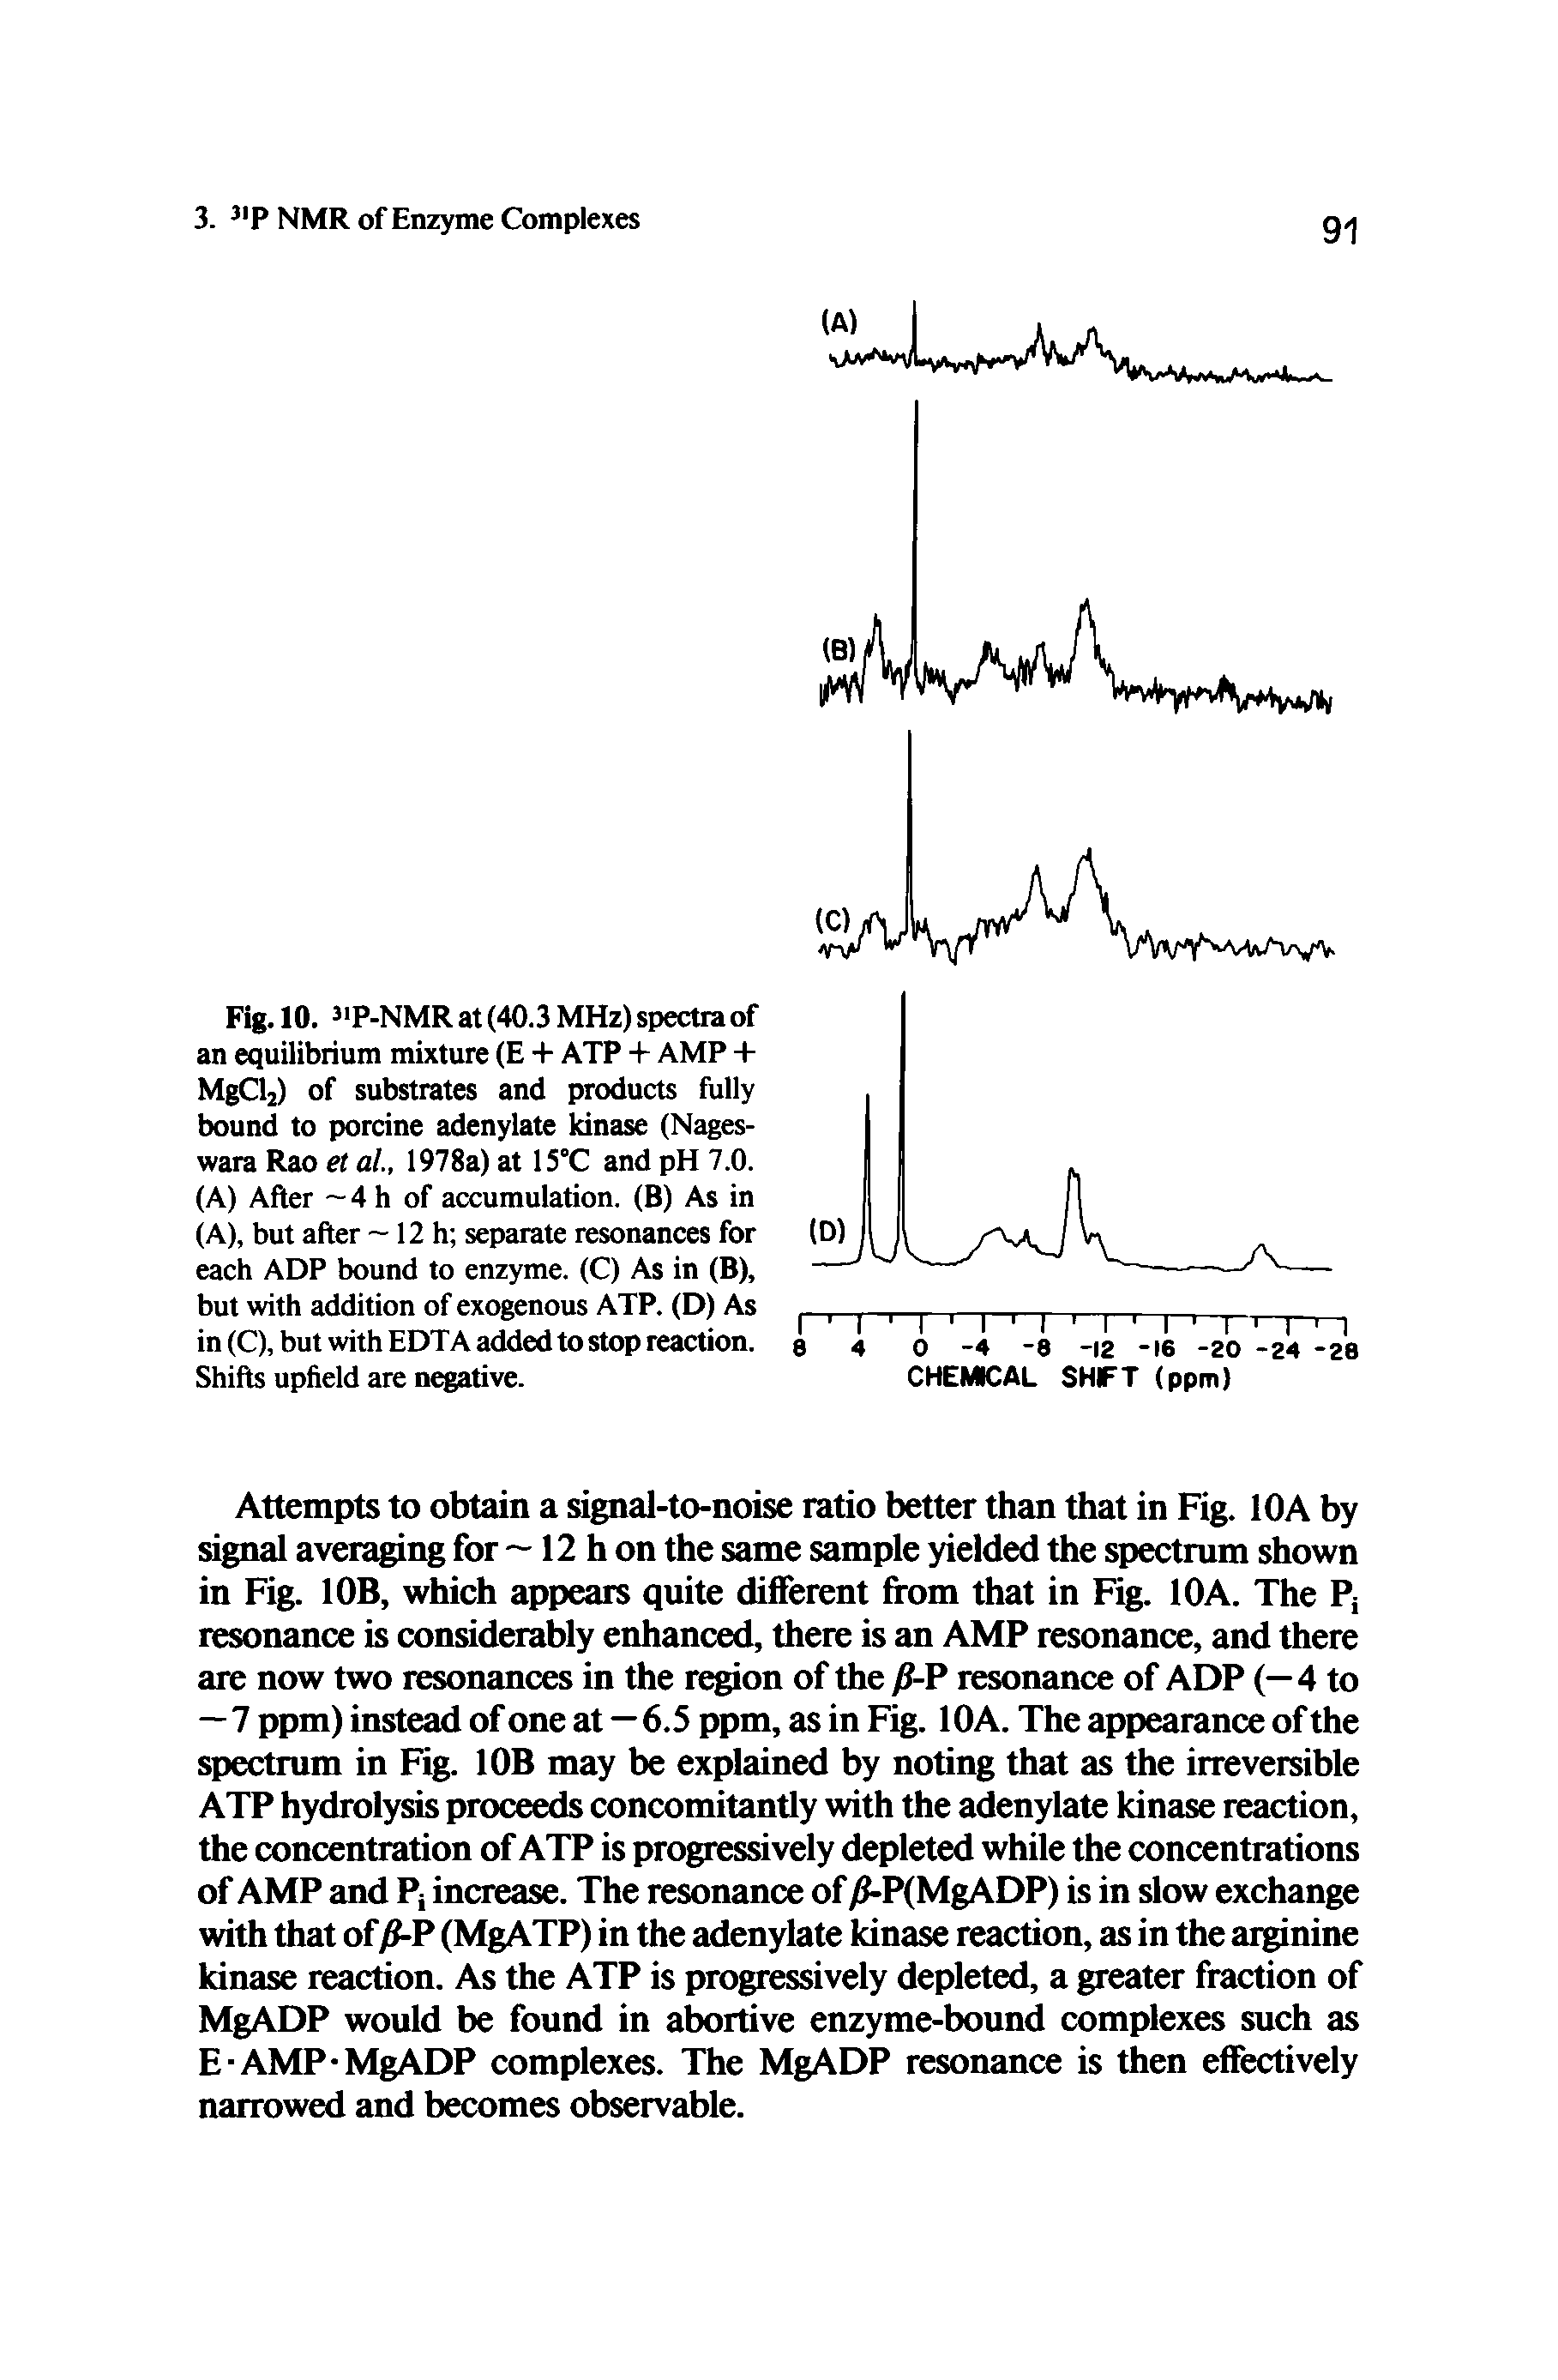 Fig. 10. P-NMR at (40.3 MHz) spectra of an equilibrium mixture (E + ATP + AMP + MgCy of substrates and products fully bound to porcine adenylate kinase (Nages-wara Rao et al, 1978a) at 15°C and pH 7.0. (A) After 4 h of accumulation. (B) As in (A), but after —12 h separate resonances for each ADP bound to enzyme. (C) As in (B), but with addition of exogenous ATP. (D) As in (C), but with EDTA added to stop reaction. Shifts upheld are negative.